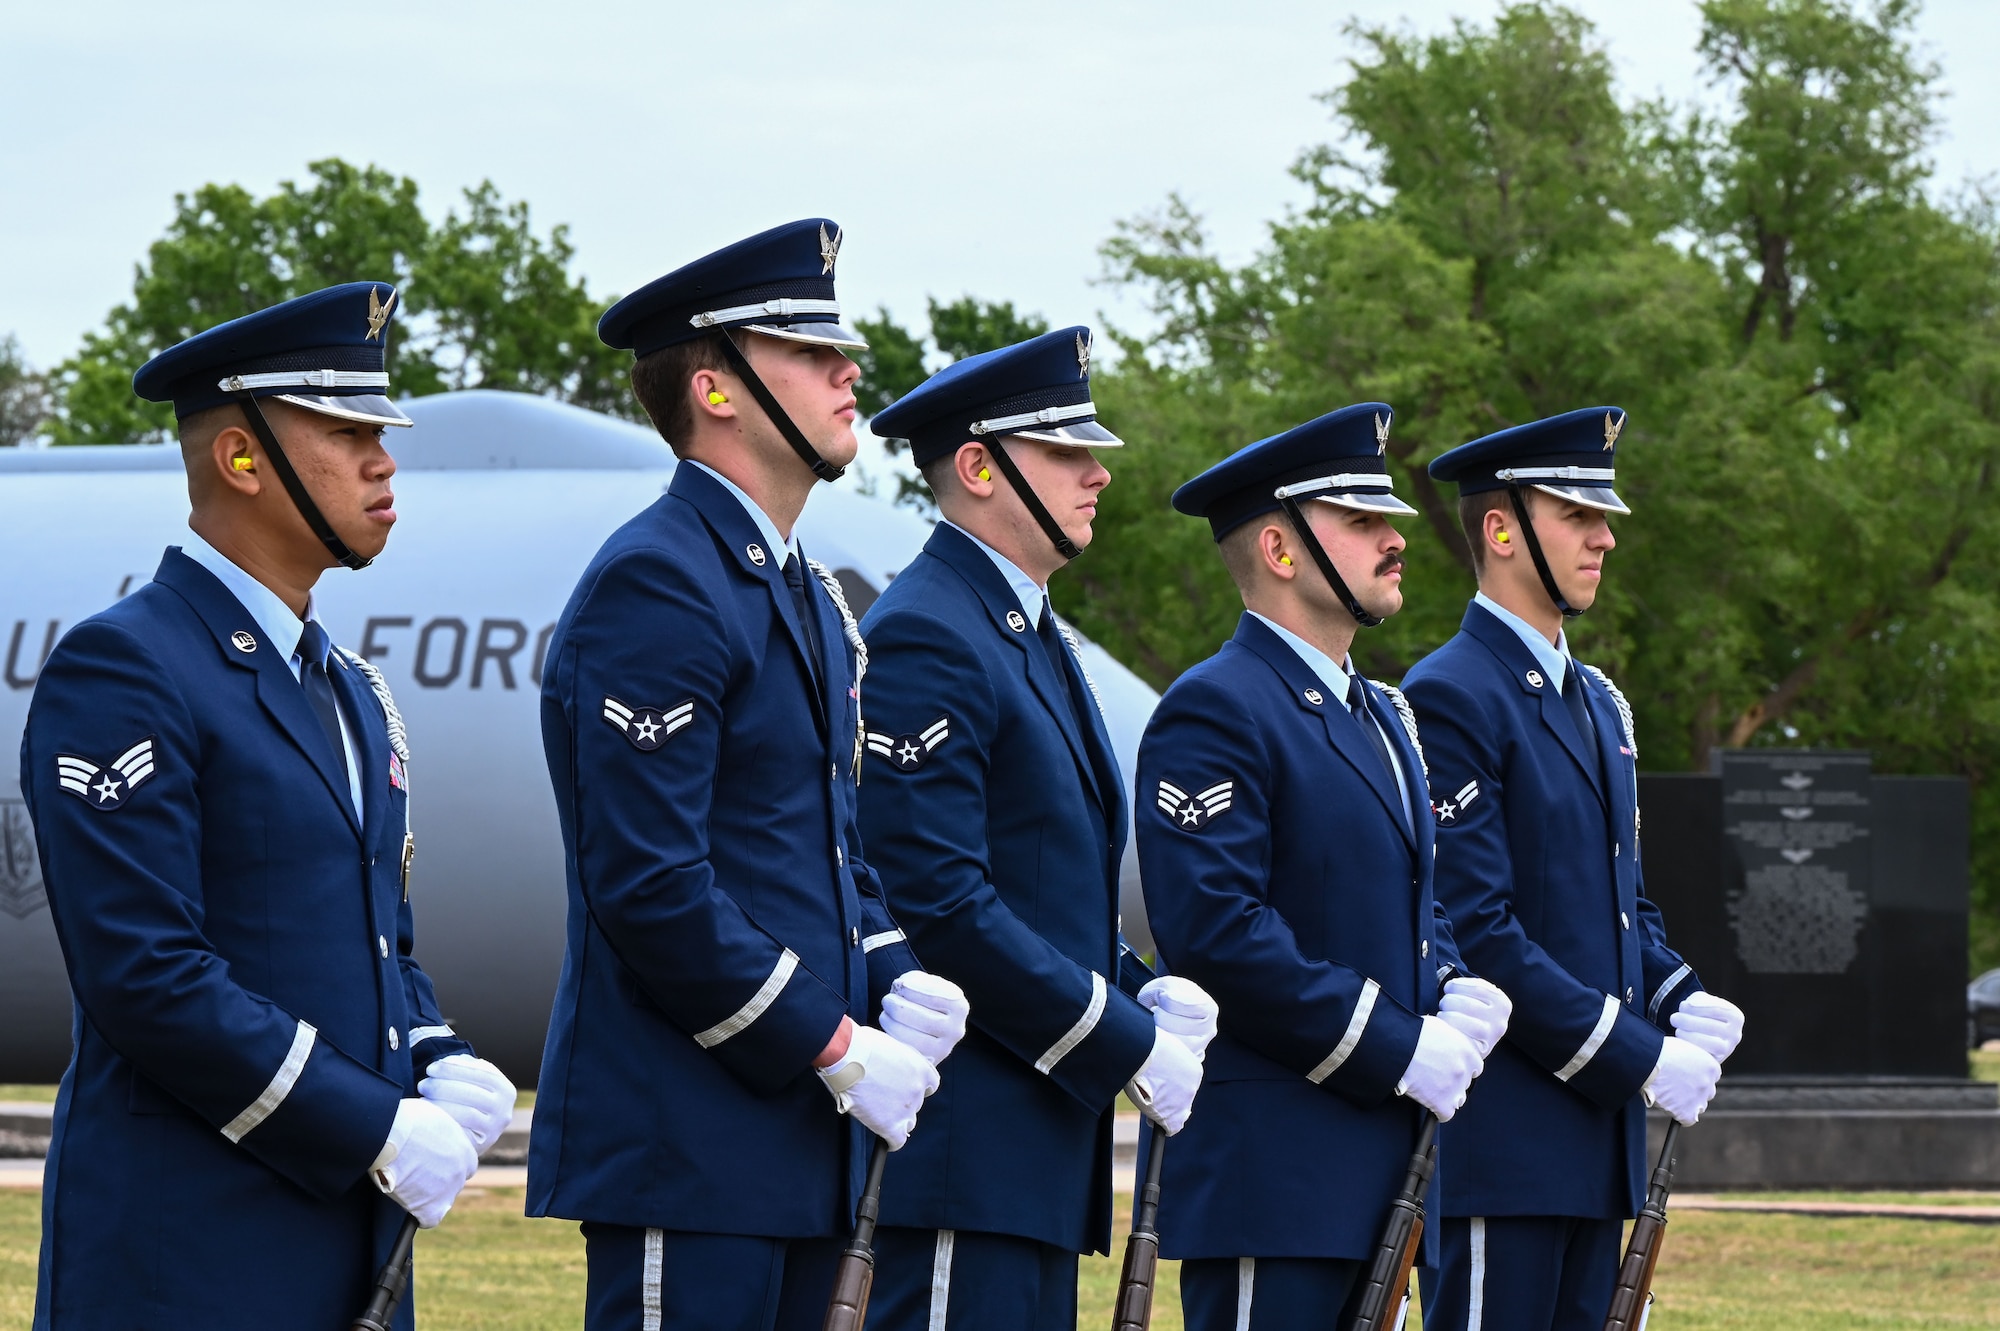 The Blue Knights Honor Guard stands at a resting position during the Shell 77 memorial at Altus Air Force Base, Oklahoma, May 3, 2023. The Honor Guard fired their rifles during the playing of “Taps” at the memorial. (U.S. Air Force photo by Airman 1st Class Heidi Bucins)